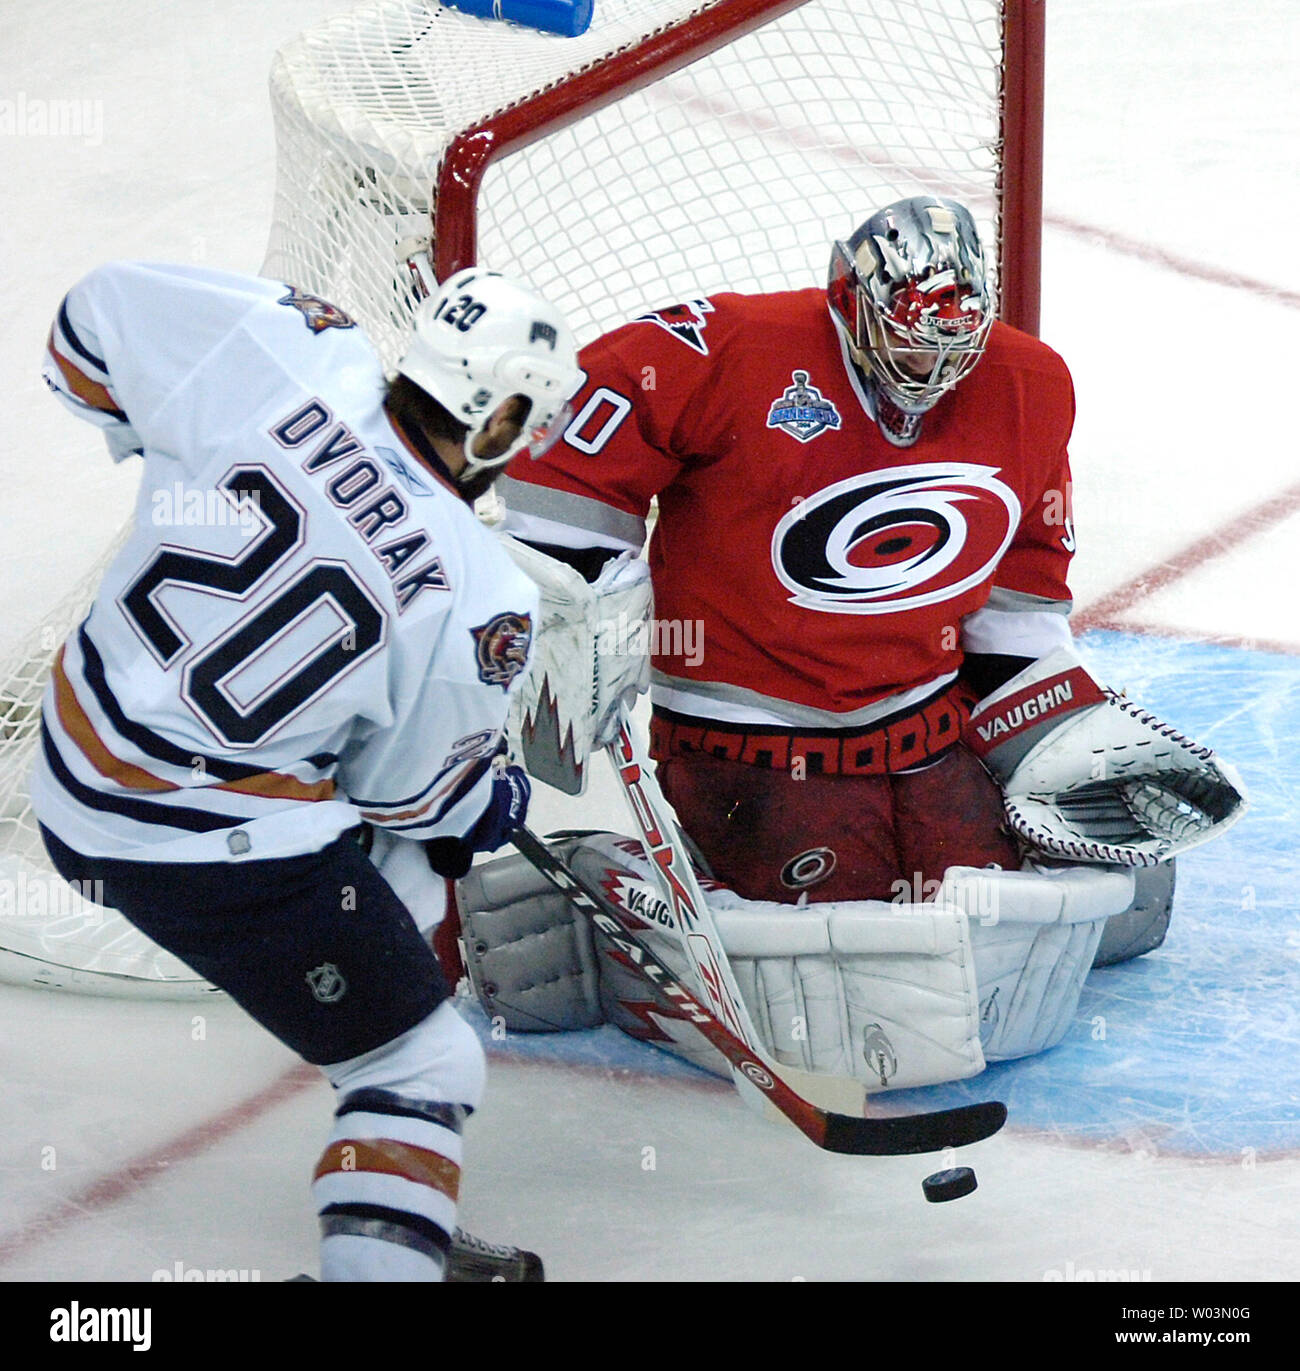 Carolina Hurricanes' Eric Staal, top, knocks Edmonton Oilers' Jarret Stoll  to the ice during Game 2 of the NHL Stanley Cup Finals at the RBC Center in  Raleigh, NC June 7, 2006. (